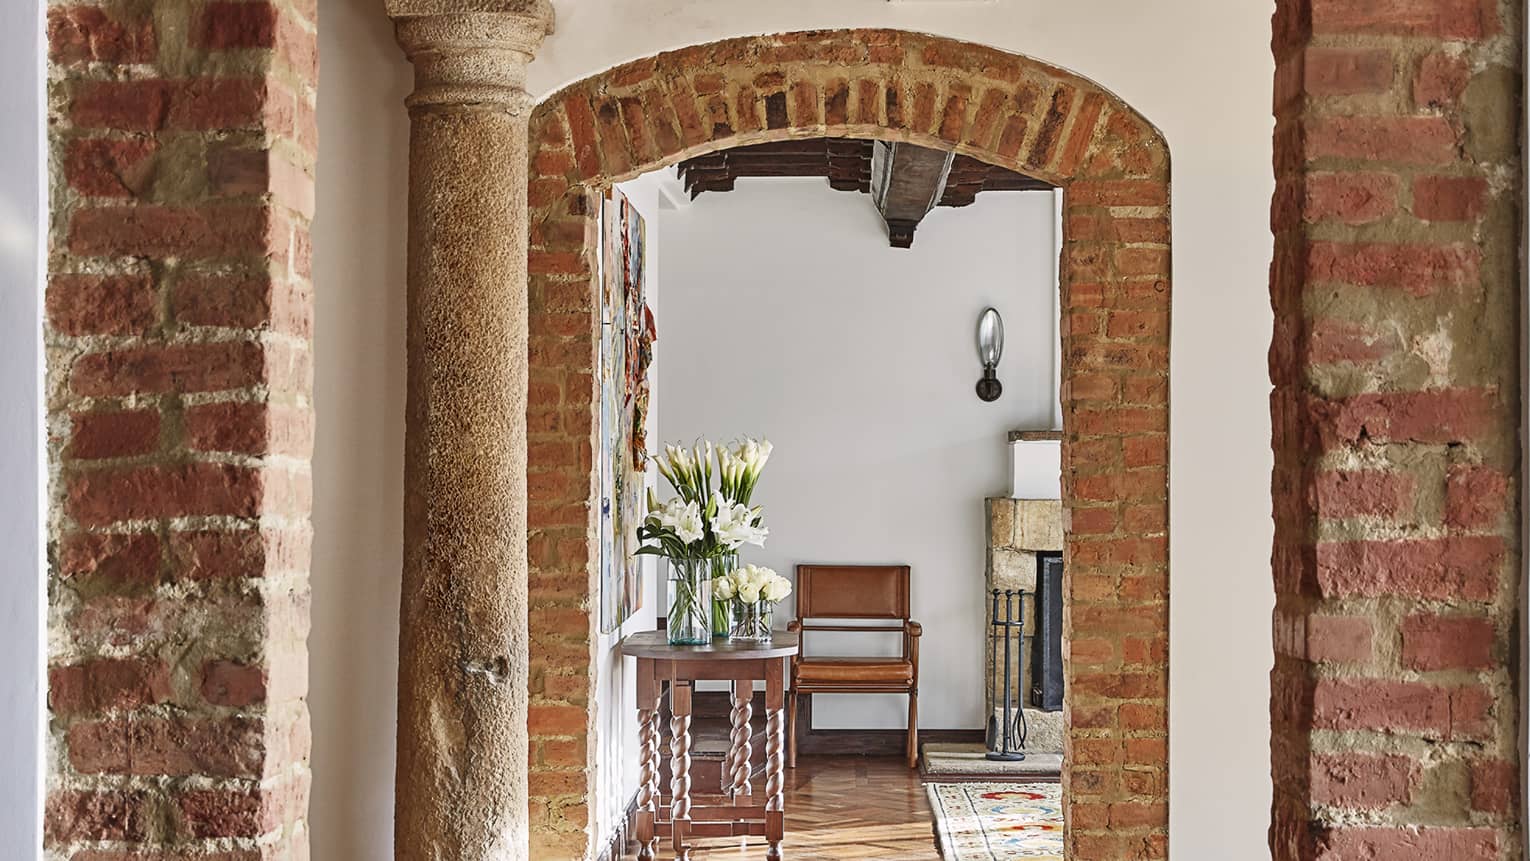 Rustic brick archways, pillars, lead to bright hotel room with wood table with fresh white flowers